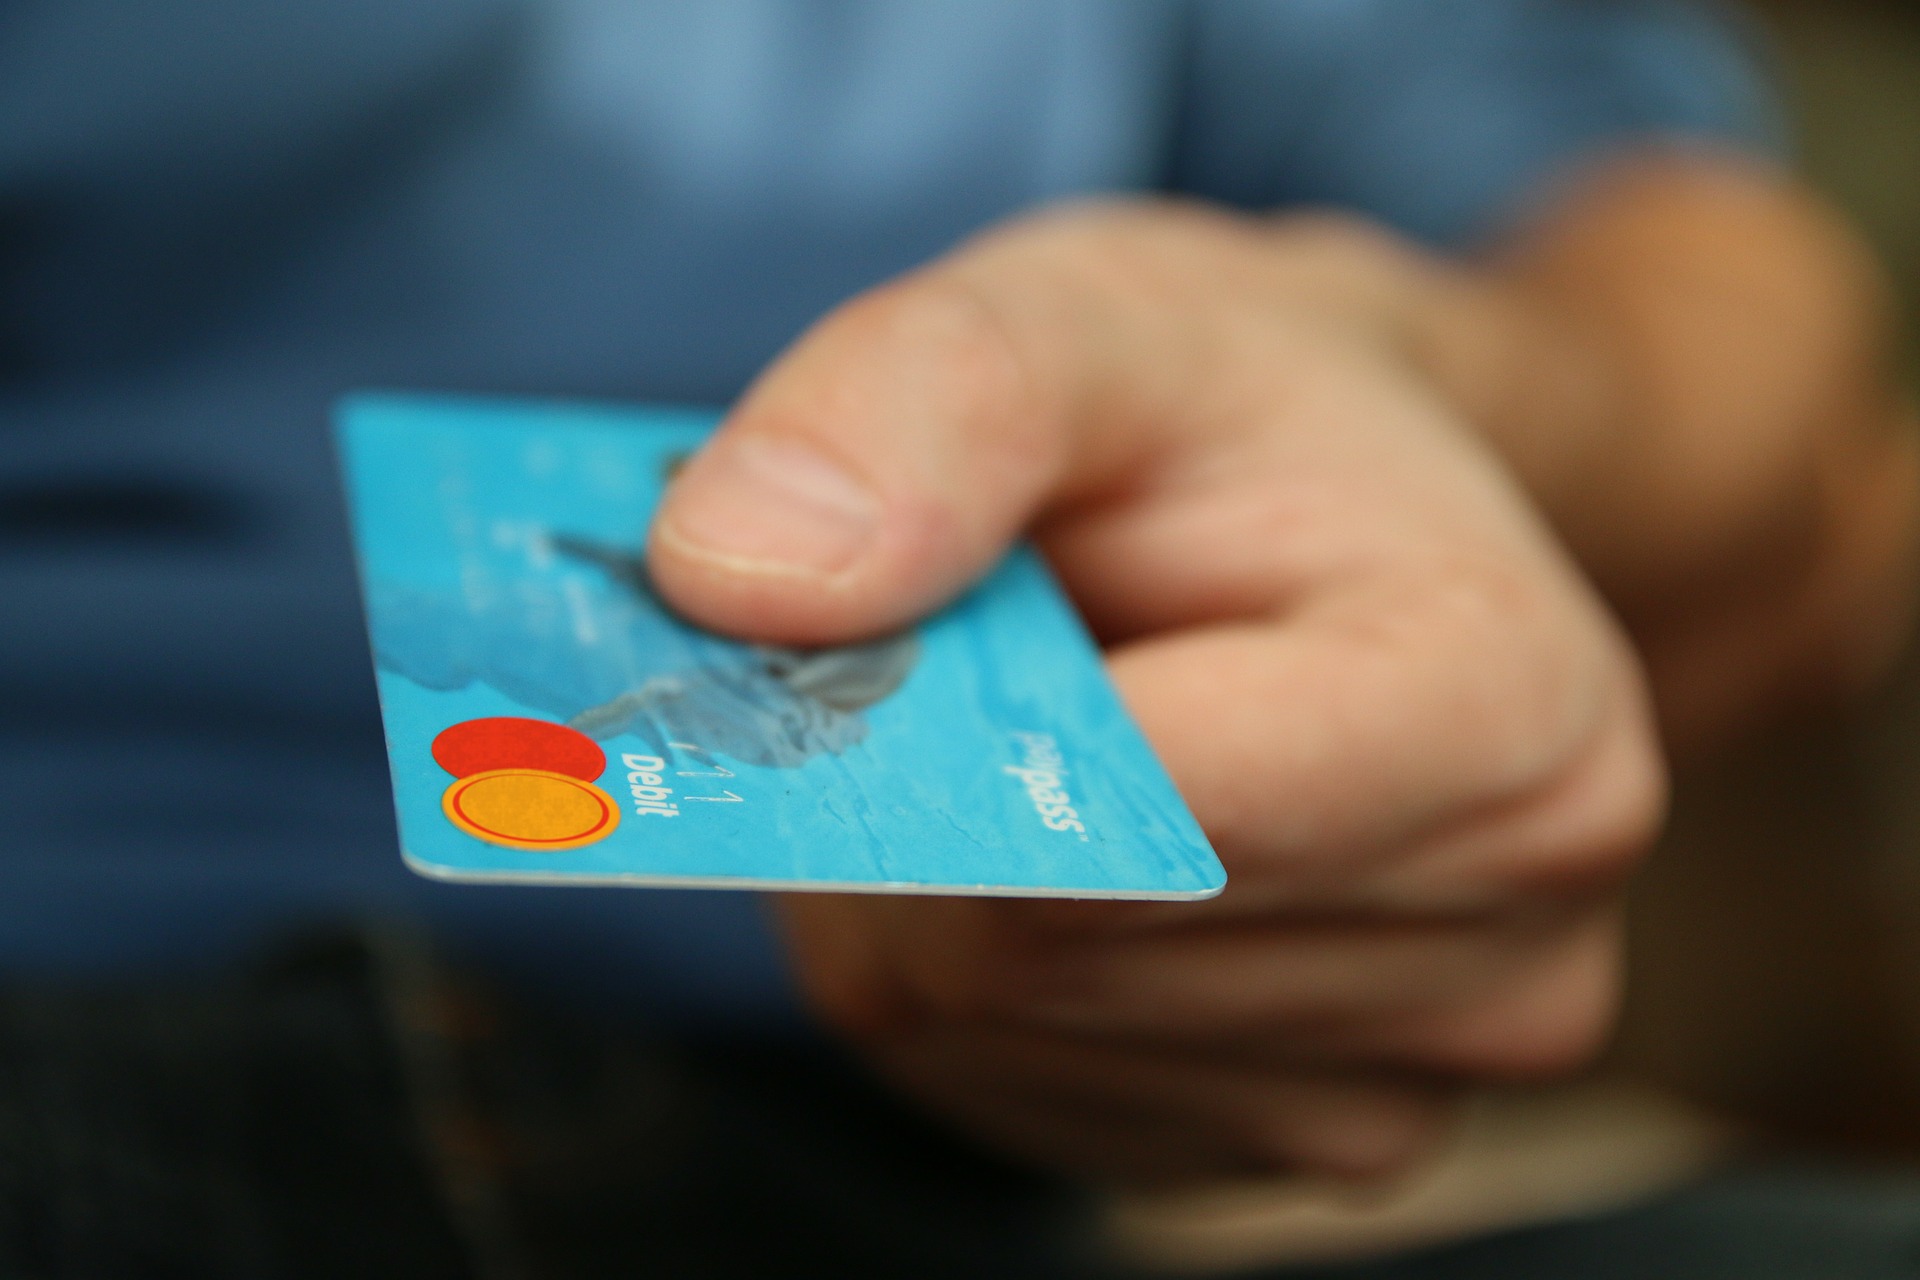 How to use credit card to your advantage?